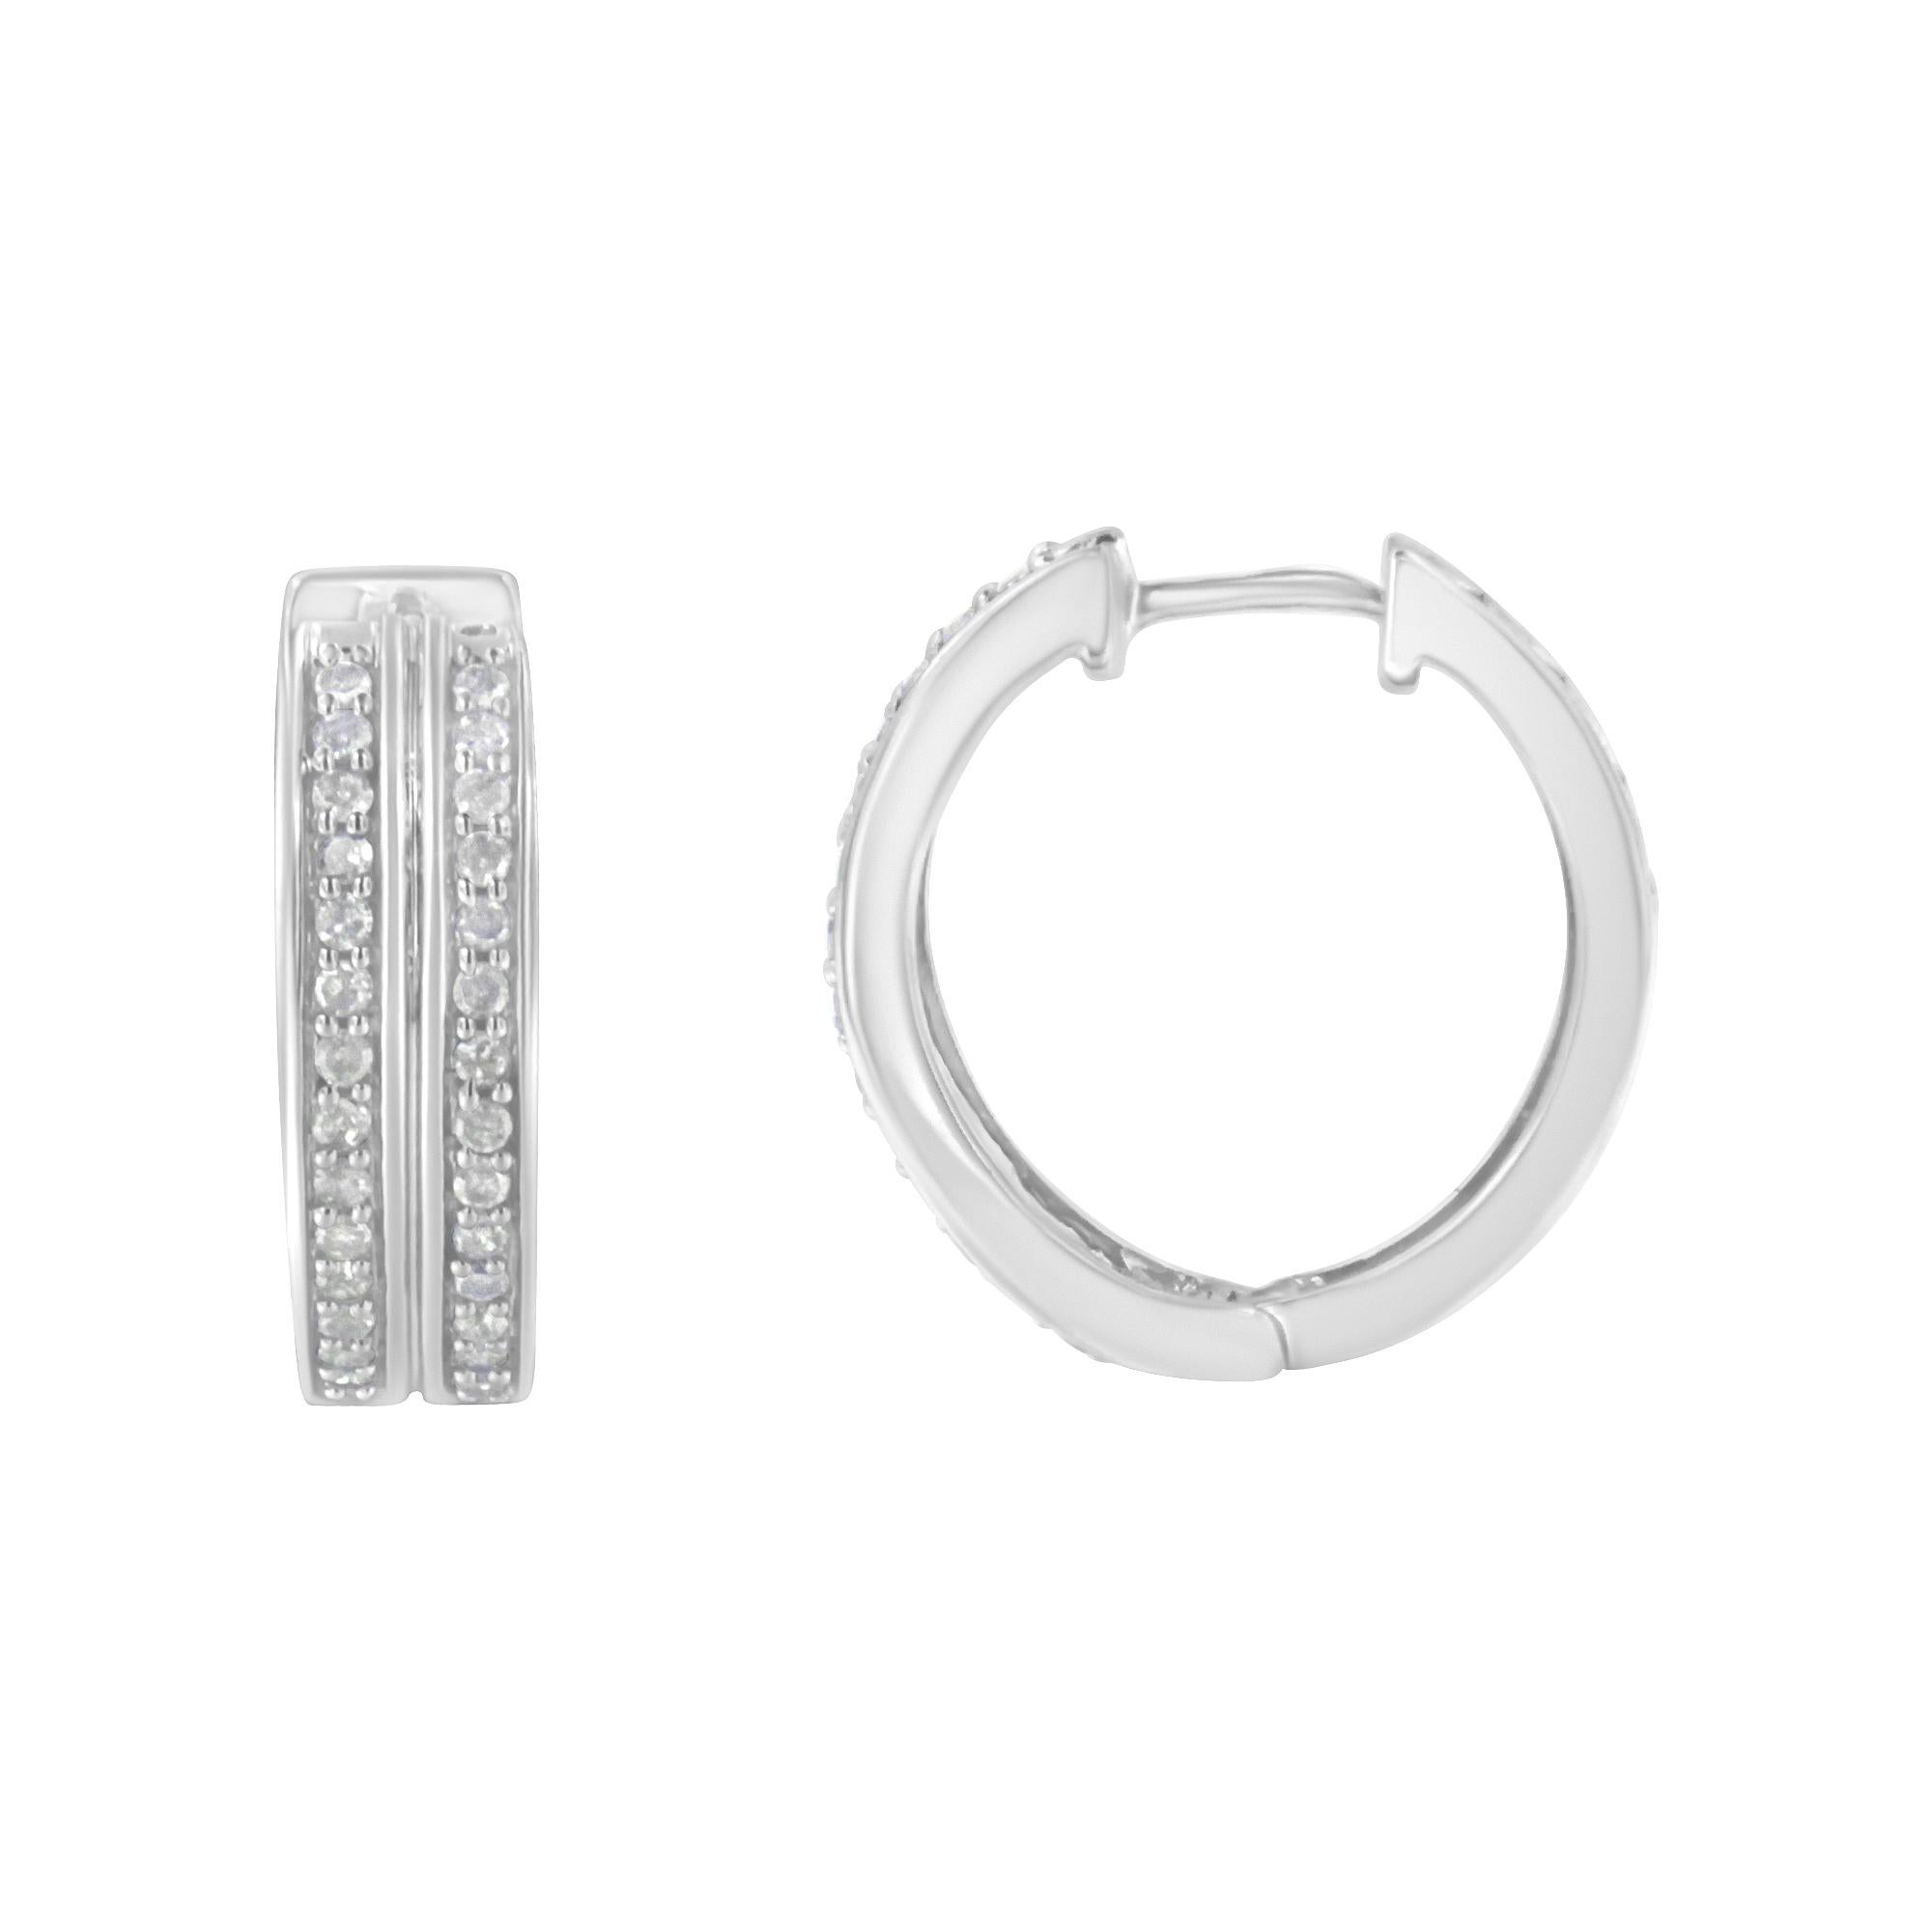 Exuberant hoop earrings made with 10k white gold and genuine diamonds. The round format of the earring contains 56 diamonds with a cut-shape and a pave setting. This silver-plated colored jewelry piece comes with lever-backs and presents a 1/2ct